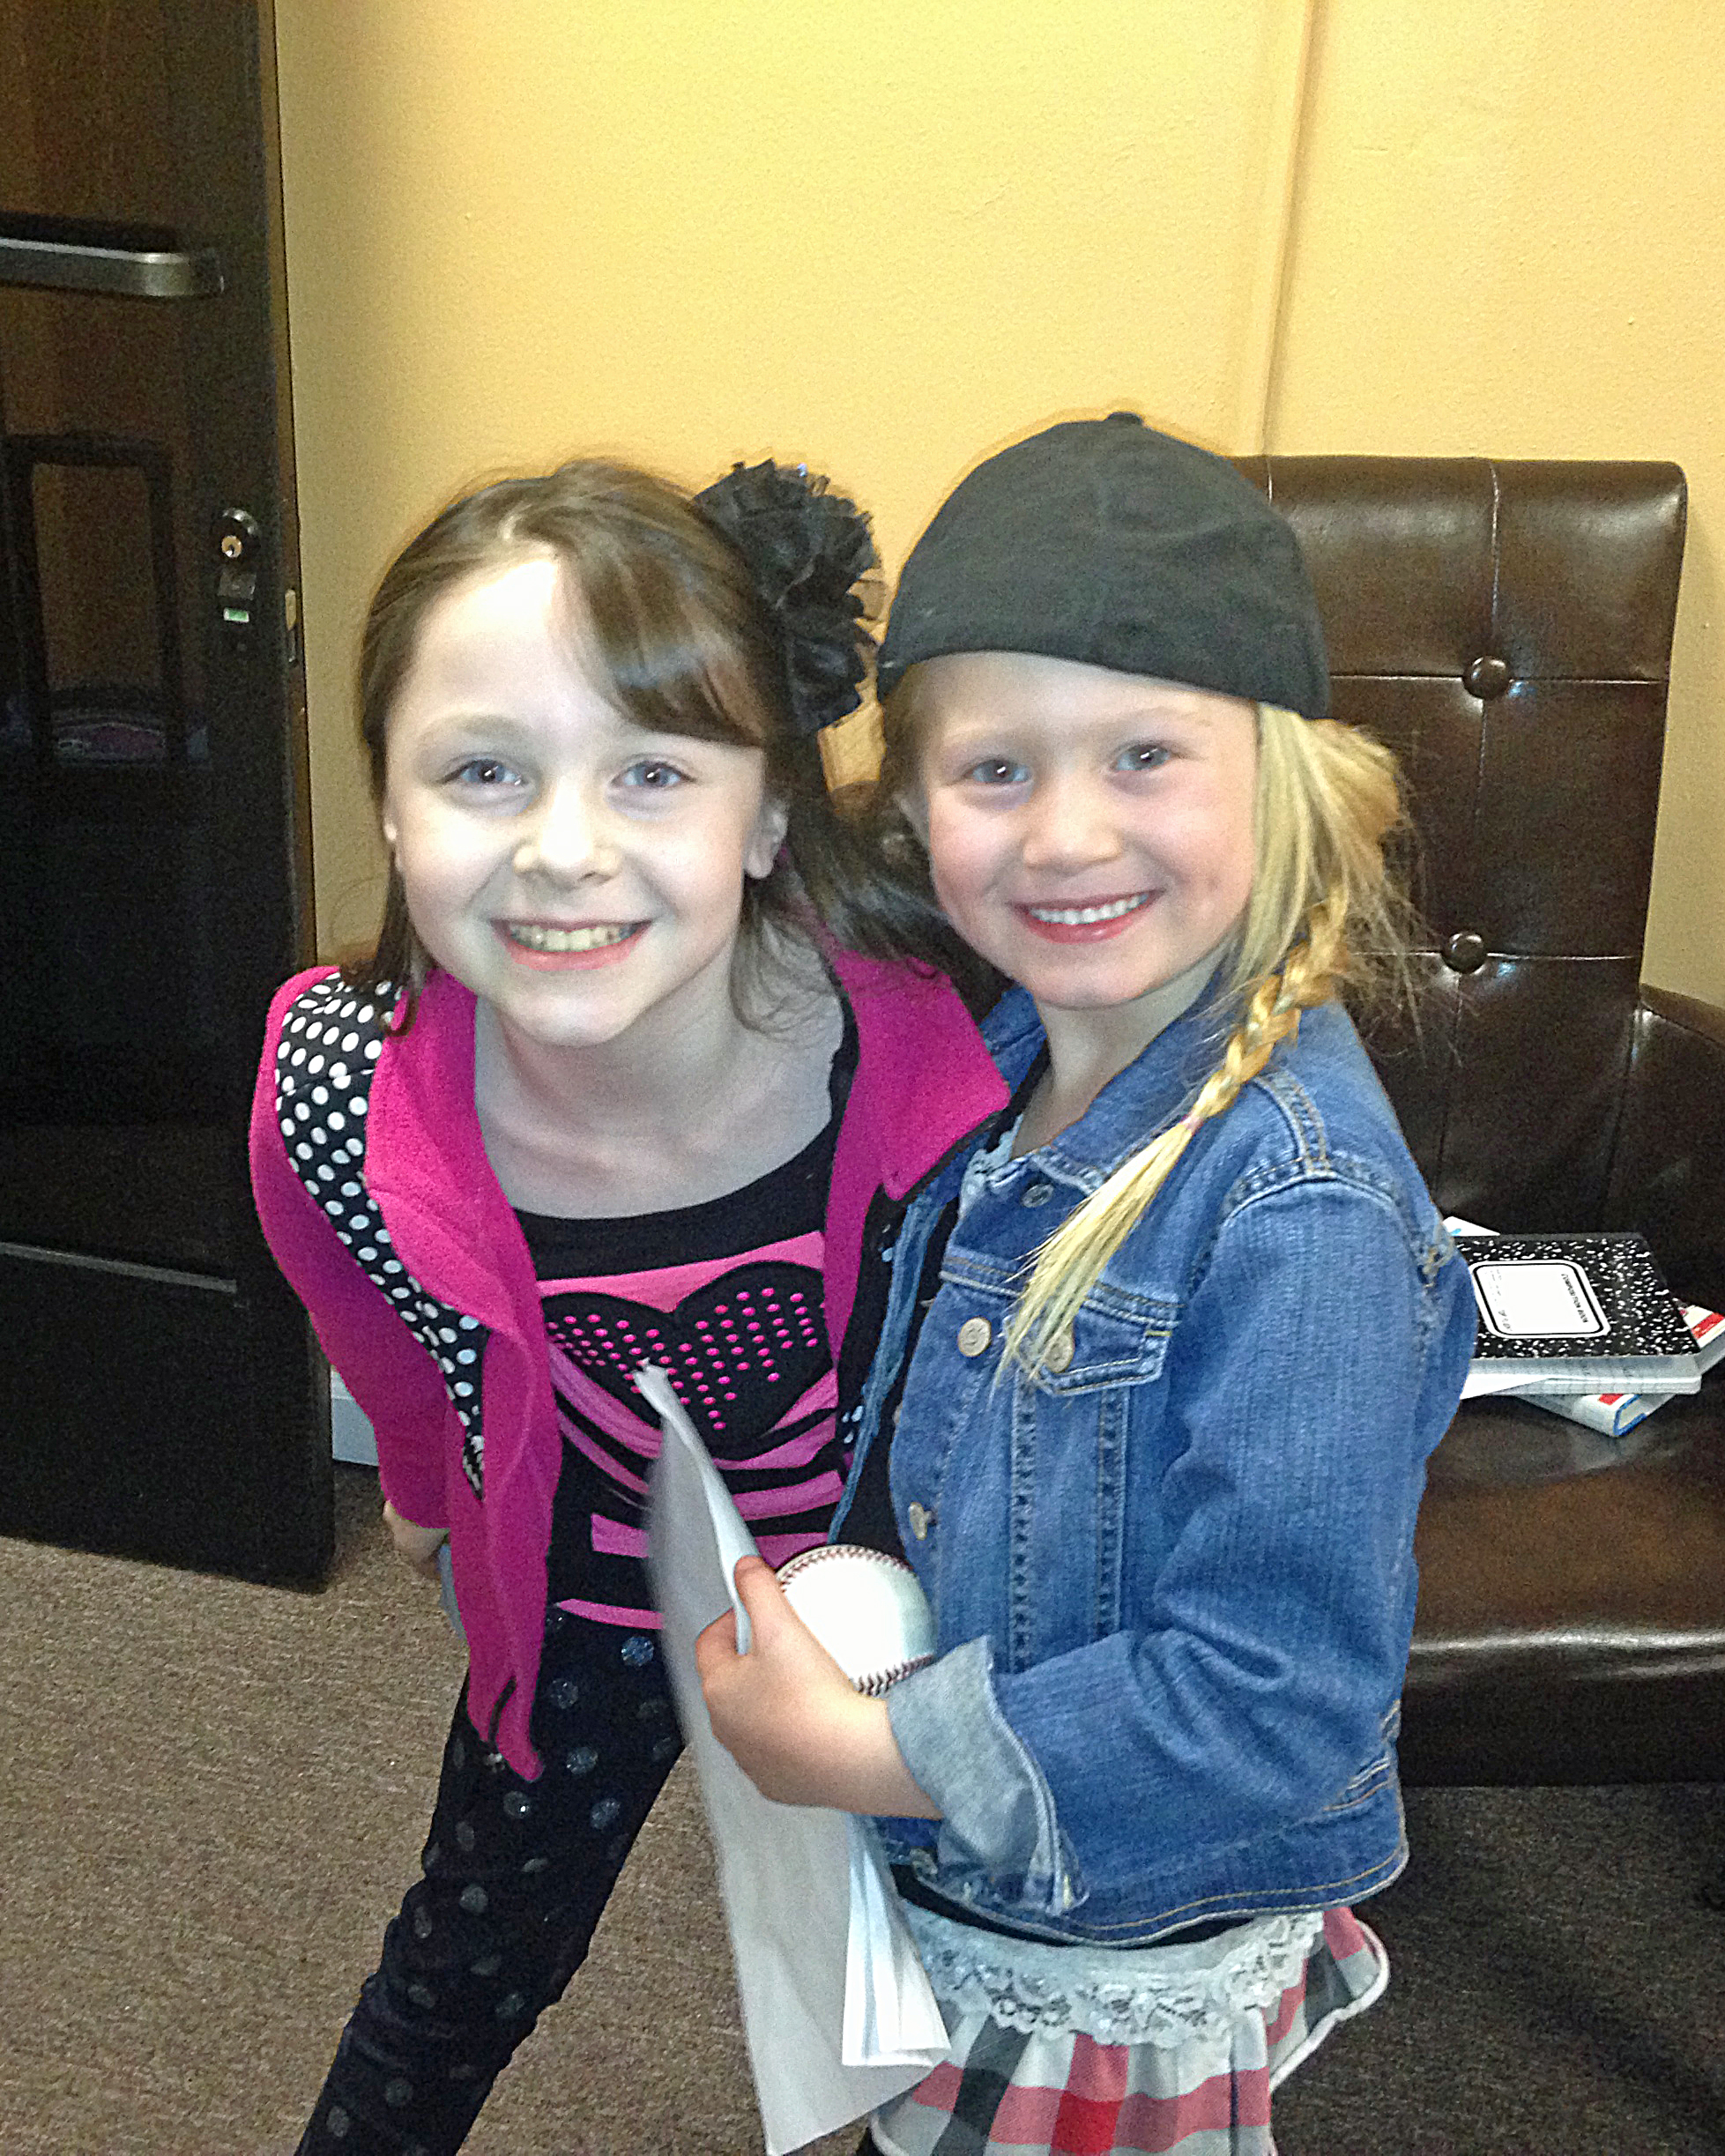 Kitana Turnbull and Abigail. Workshop with Casting Director, Deborah Maxwell Dion. January 30, 2014.